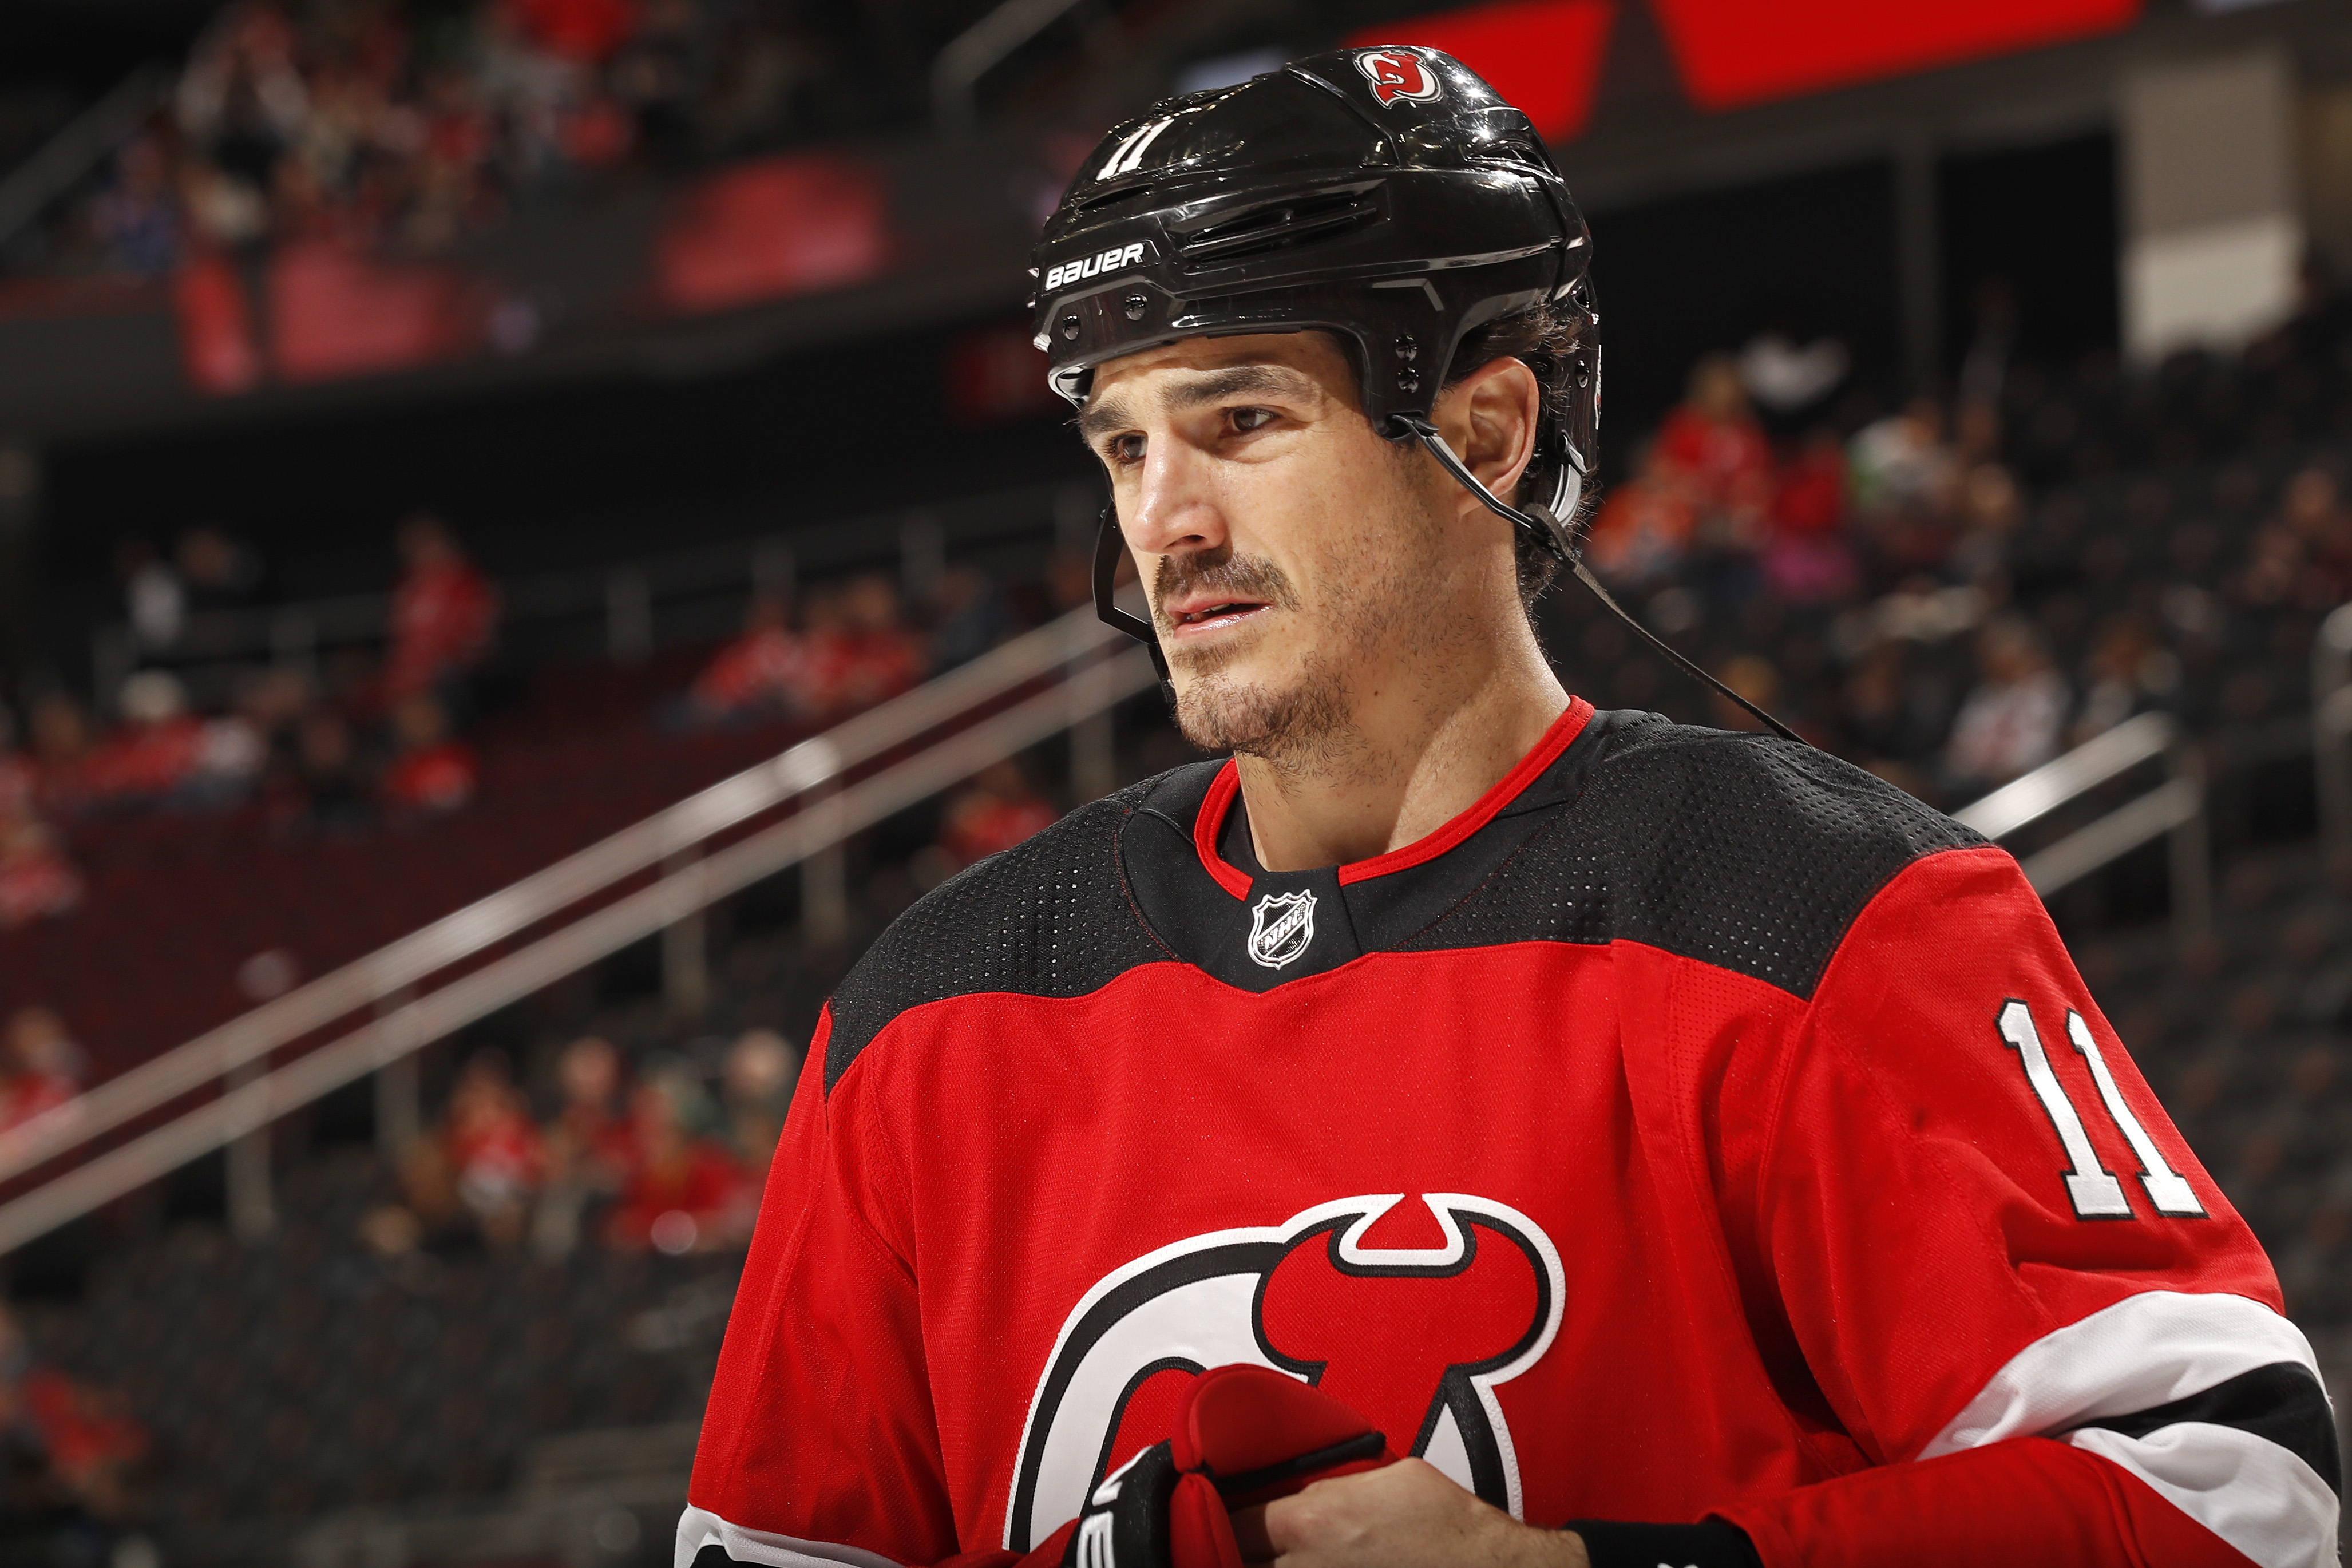 Why 'Everyman' Brian Boyle connected with Lightning fans